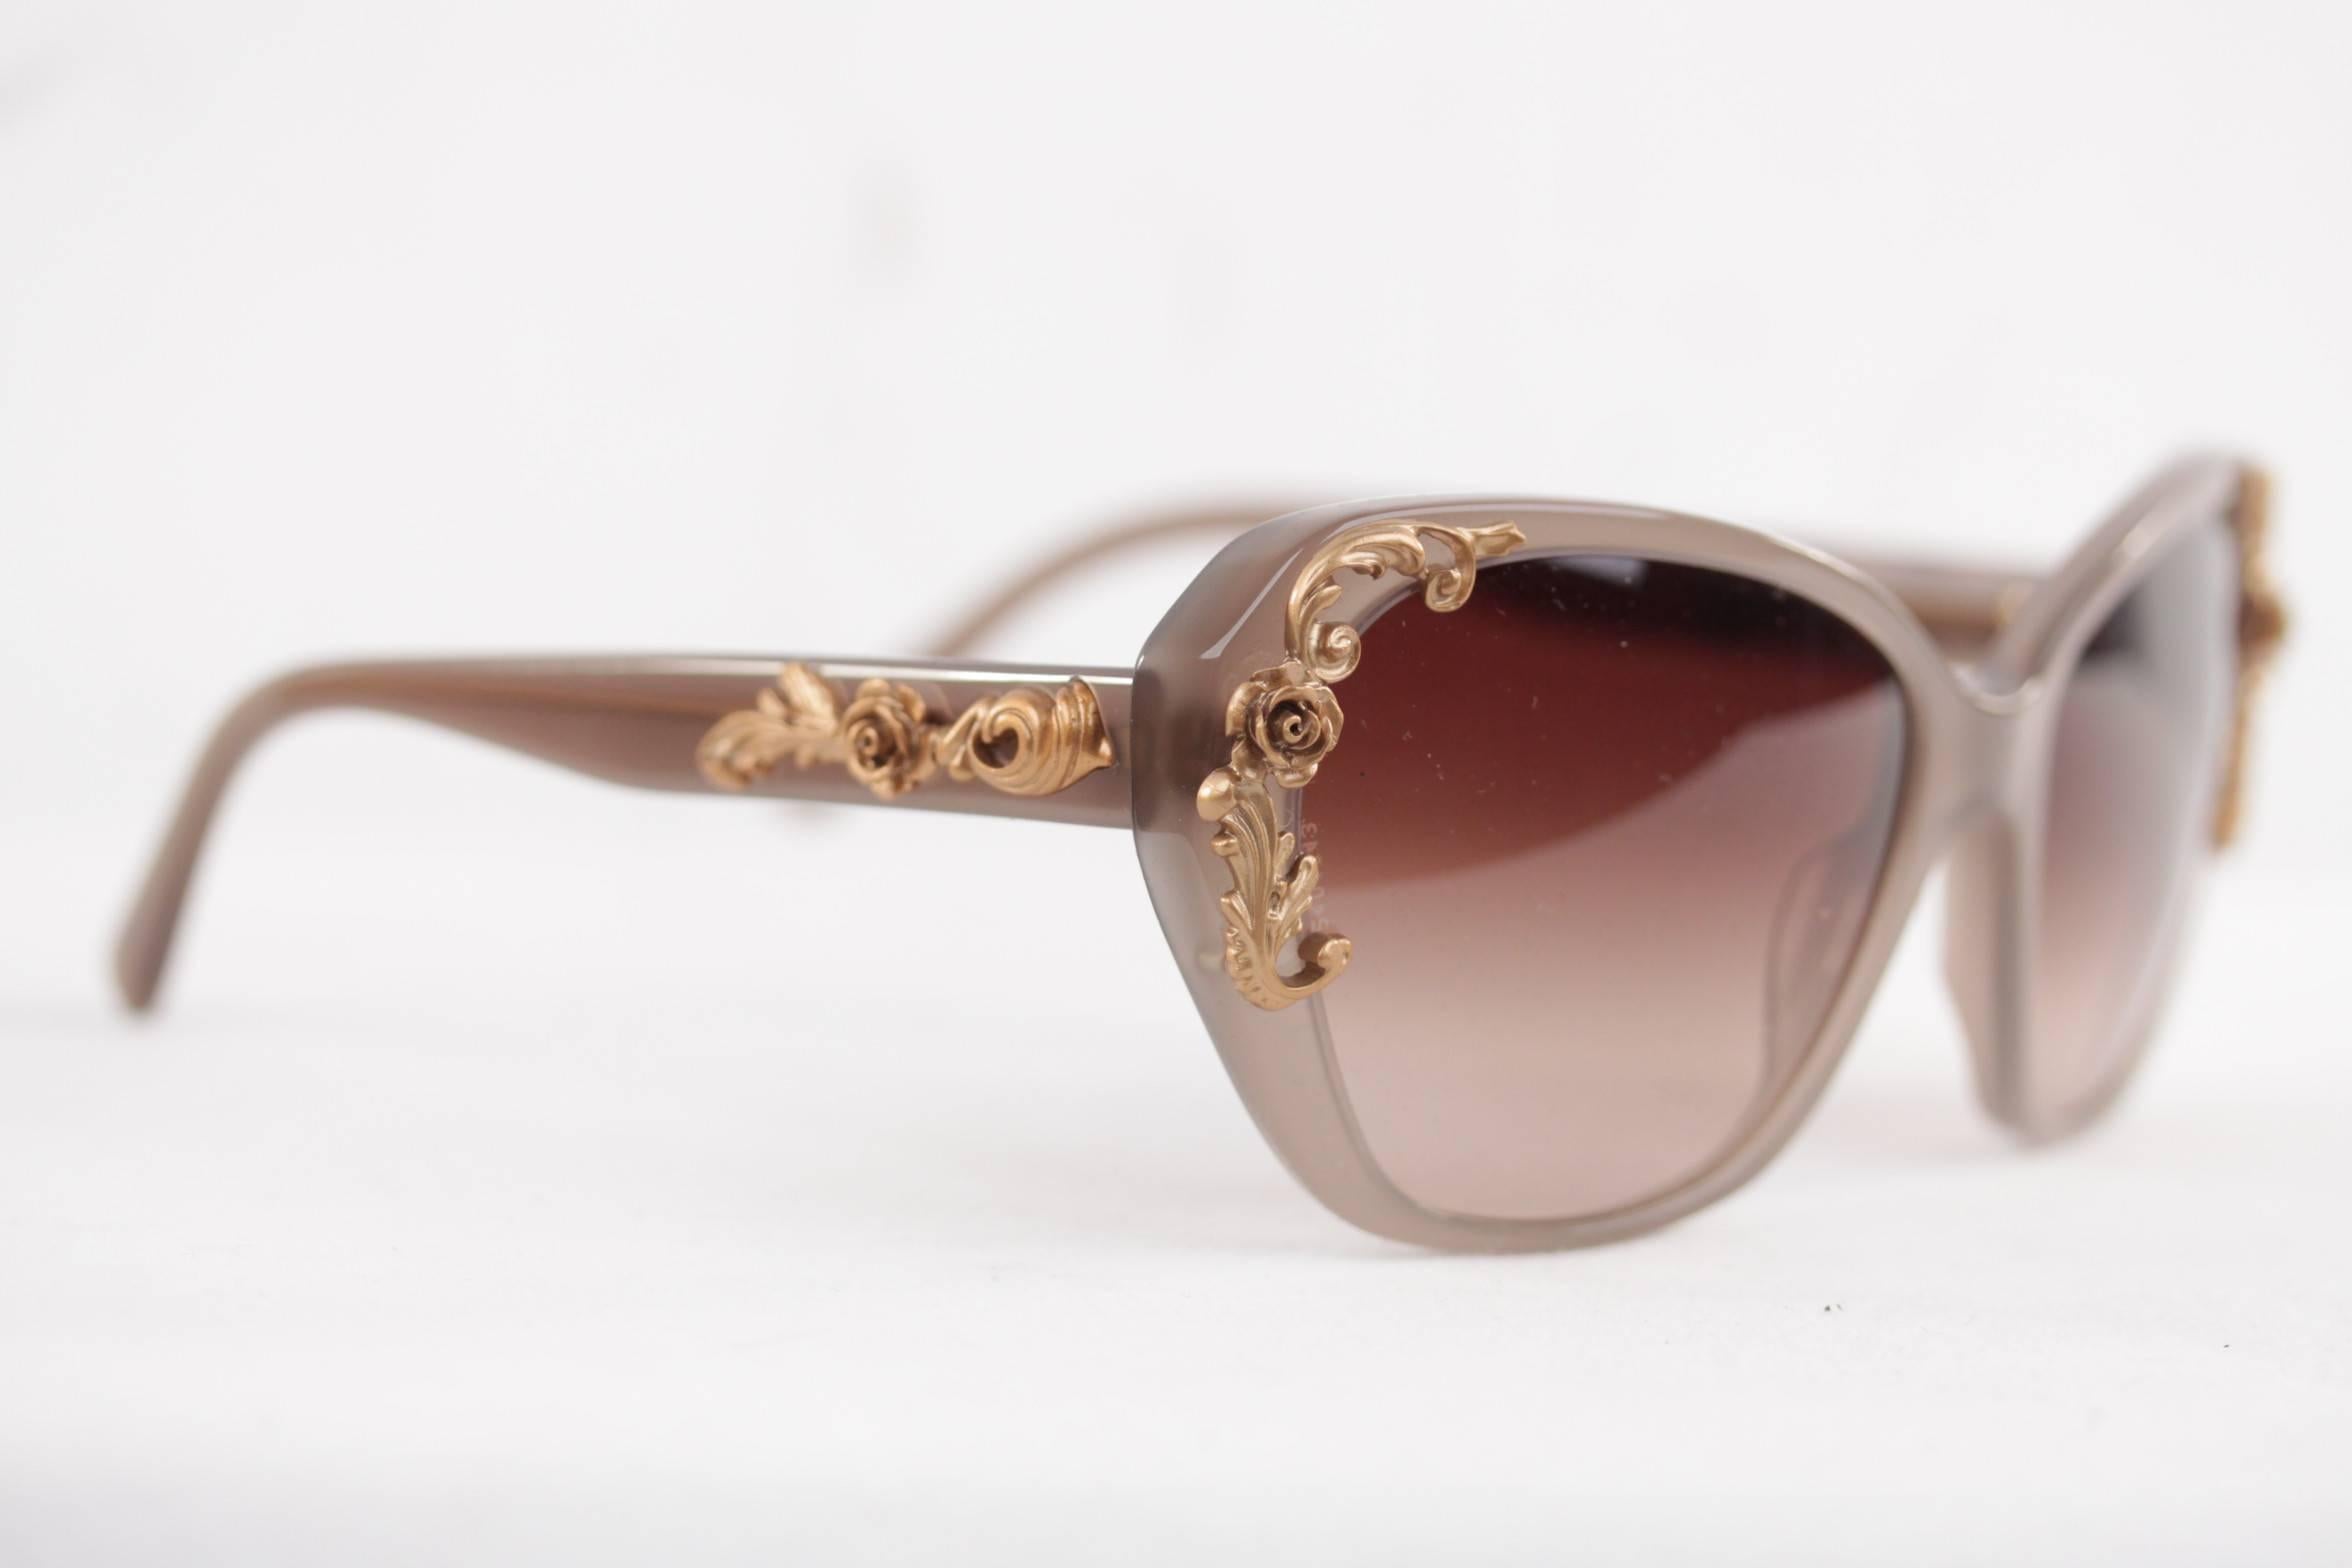 - Dolce & Gabbana, Made in Italy

- Brown/beige color, beautiful gold metal sicilian baroque rose gold metal finish on the temples & sides

- DG4167 - 2679/13 - 59/17 - 140 - 3N

- Brown gradient MINT lens

- they will come with its DOLCE &